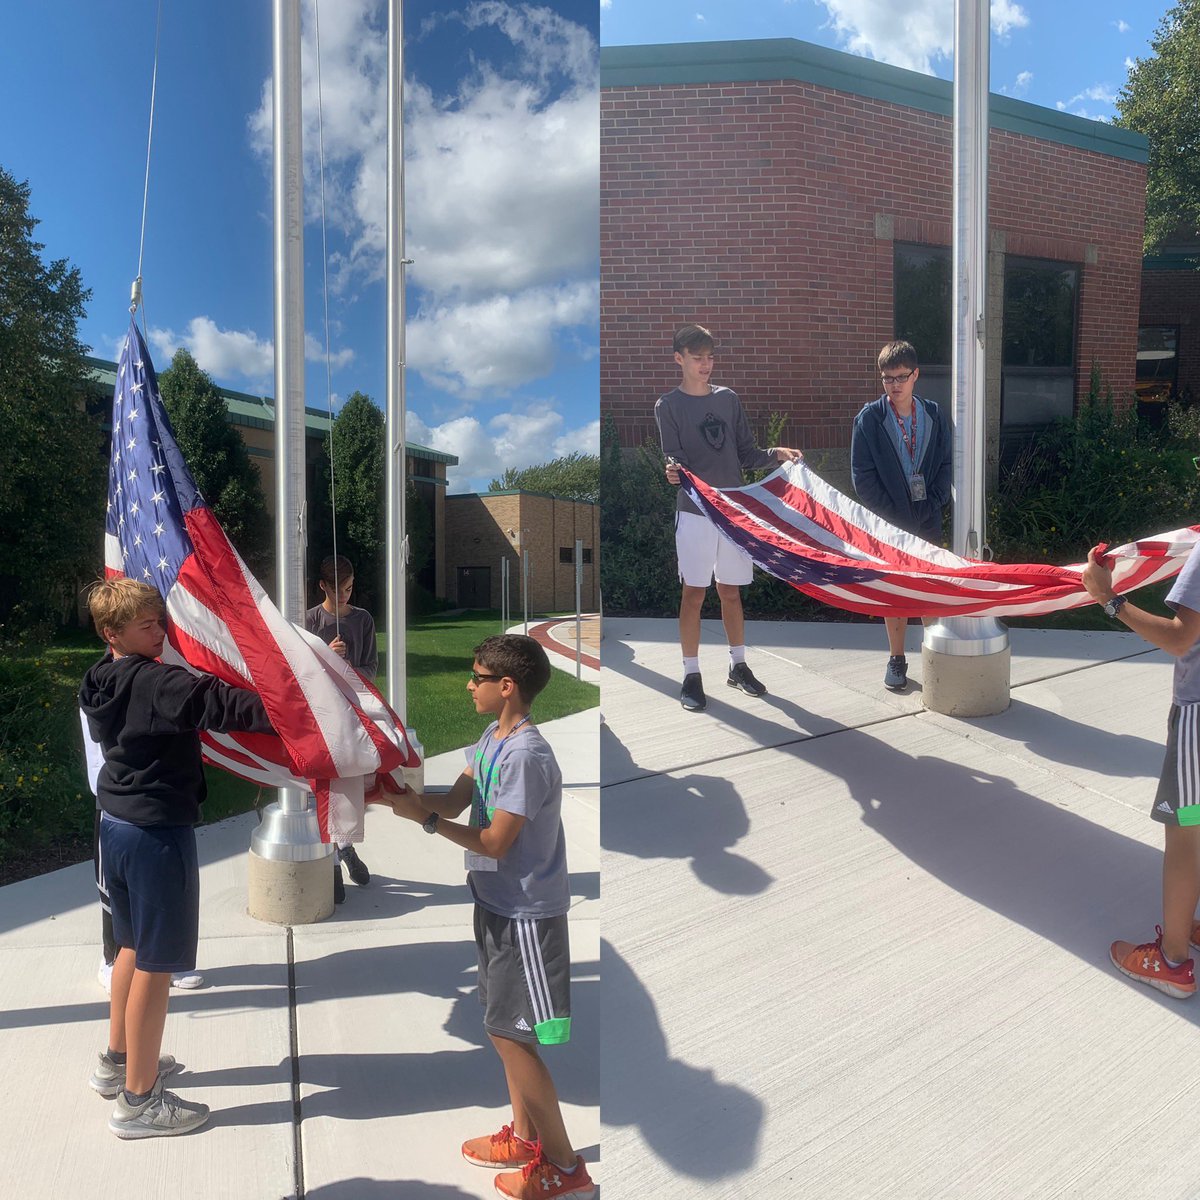 Beautiful afternoon to lower the flag and enjoy our newly placed flag poles. #Civicawareness #GWMS #Weare44